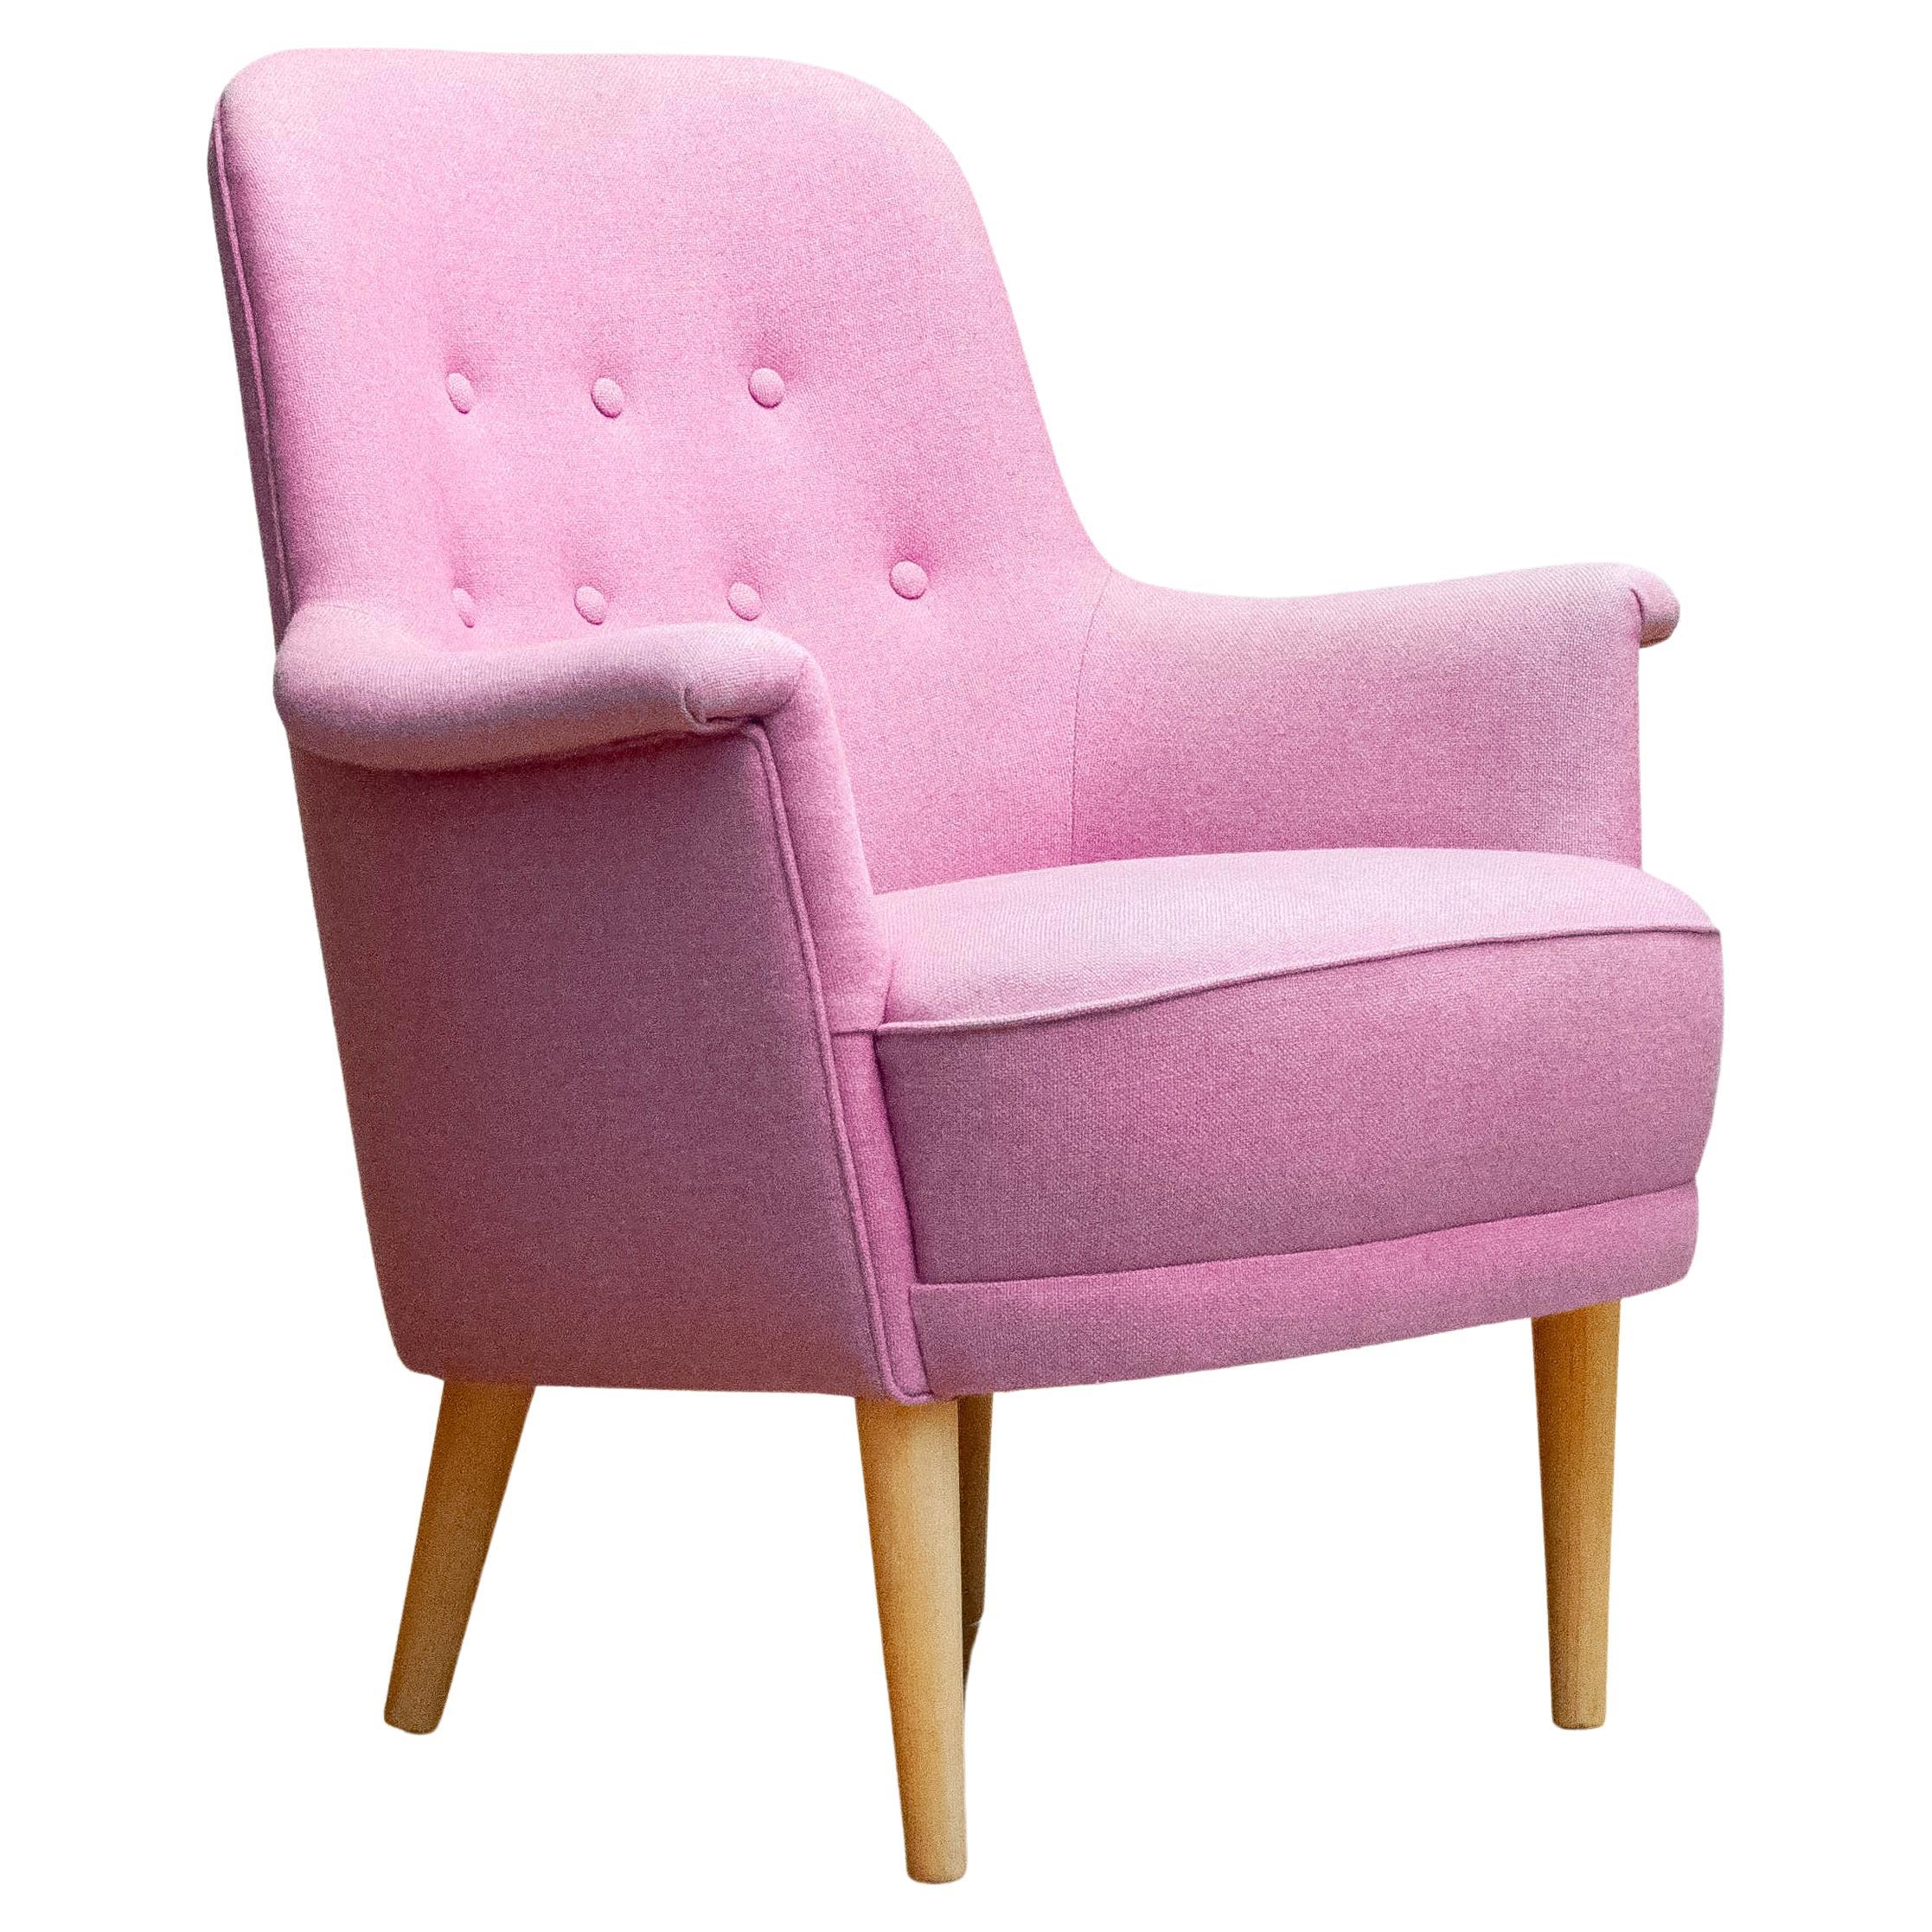 1950s Upholstered With Lilac Wool Armchair By Carl Malmsten For O.H. Sjogren.